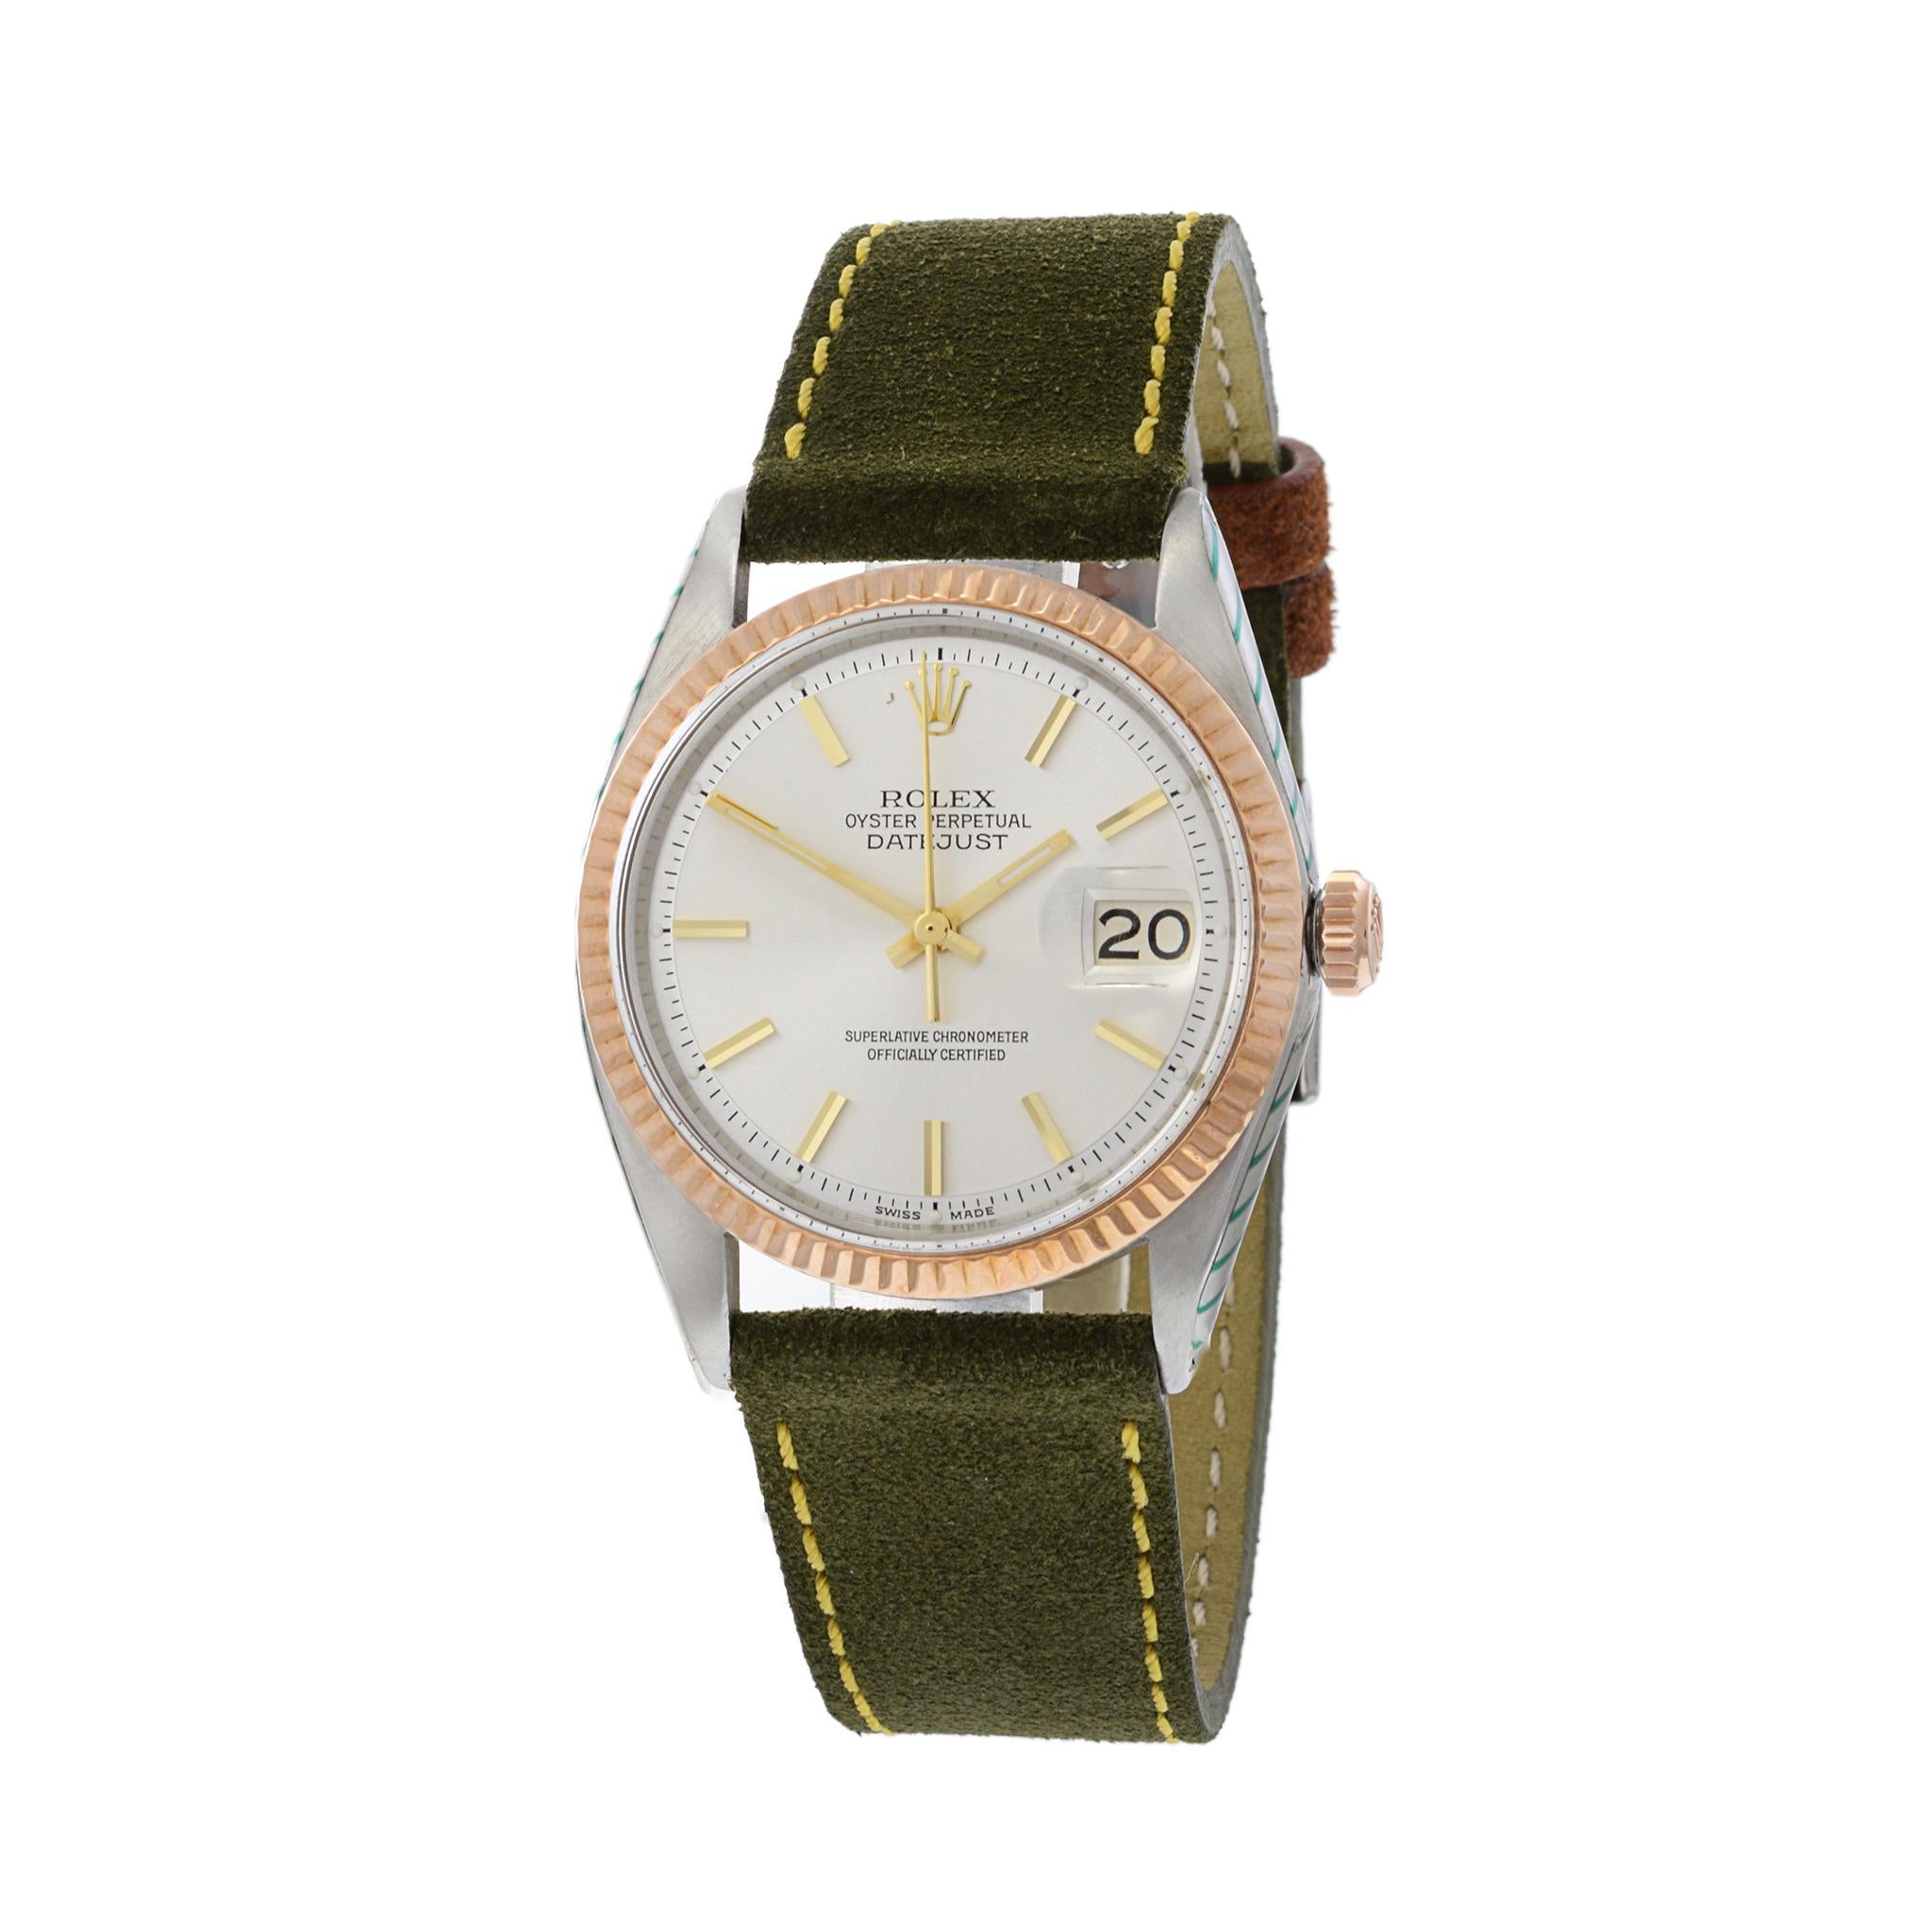 The Rolex 1601 is a classic timepiece that epitomizes the timeless elegance and precision craftsmanship for which Rolex is renowned. Introduced in the 1960s, this model is part of the esteemed Datejust collection, a symbol of luxury and